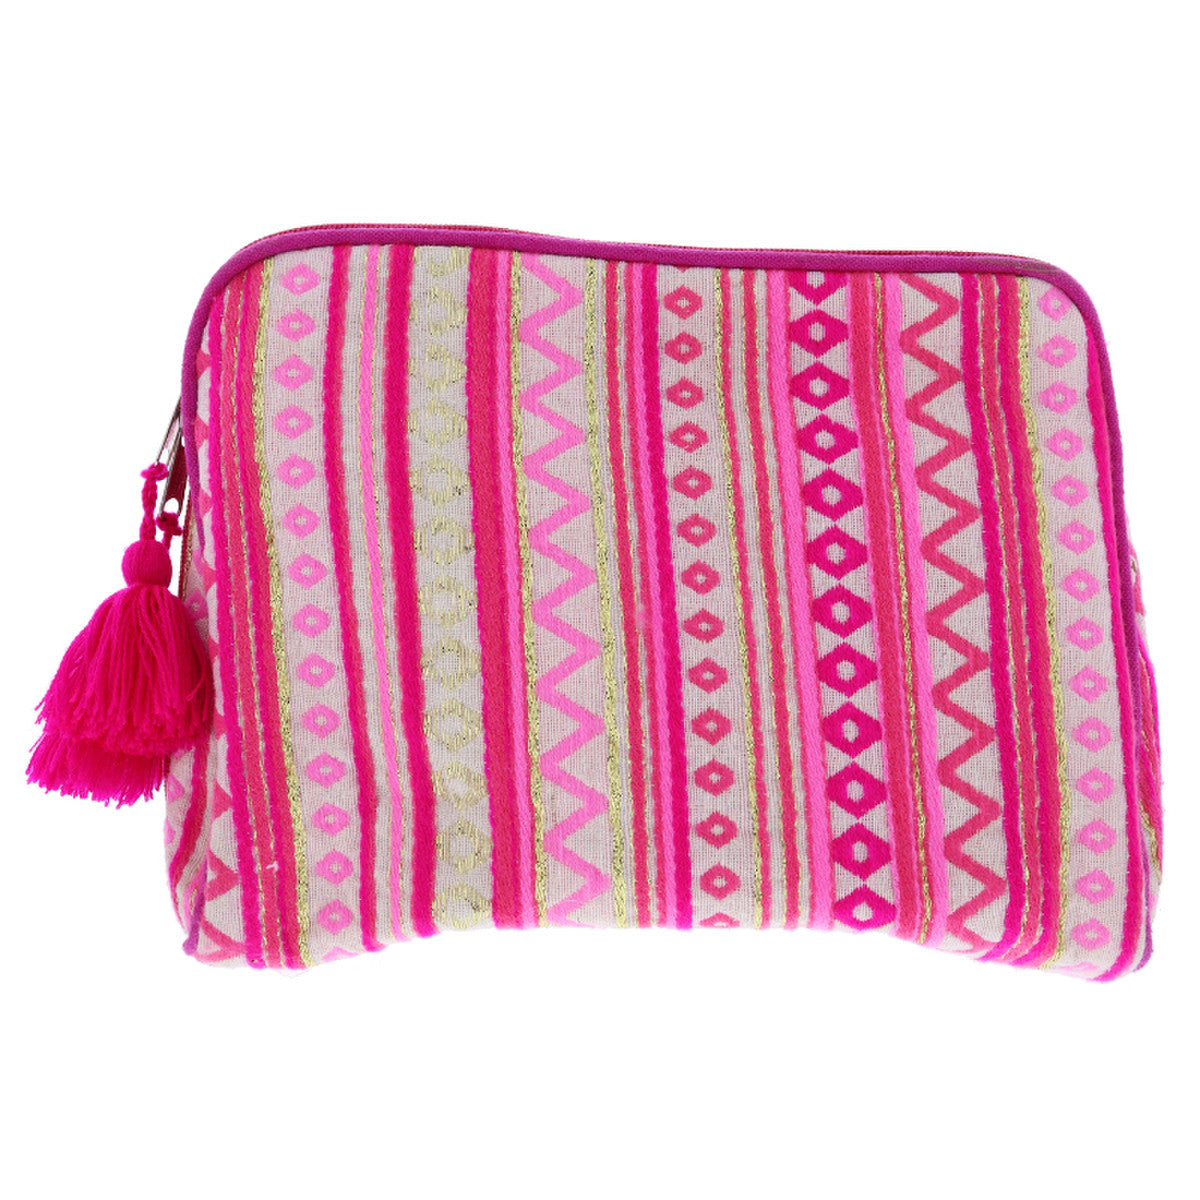 Poppin’ Pink! Large Zipper Pouch